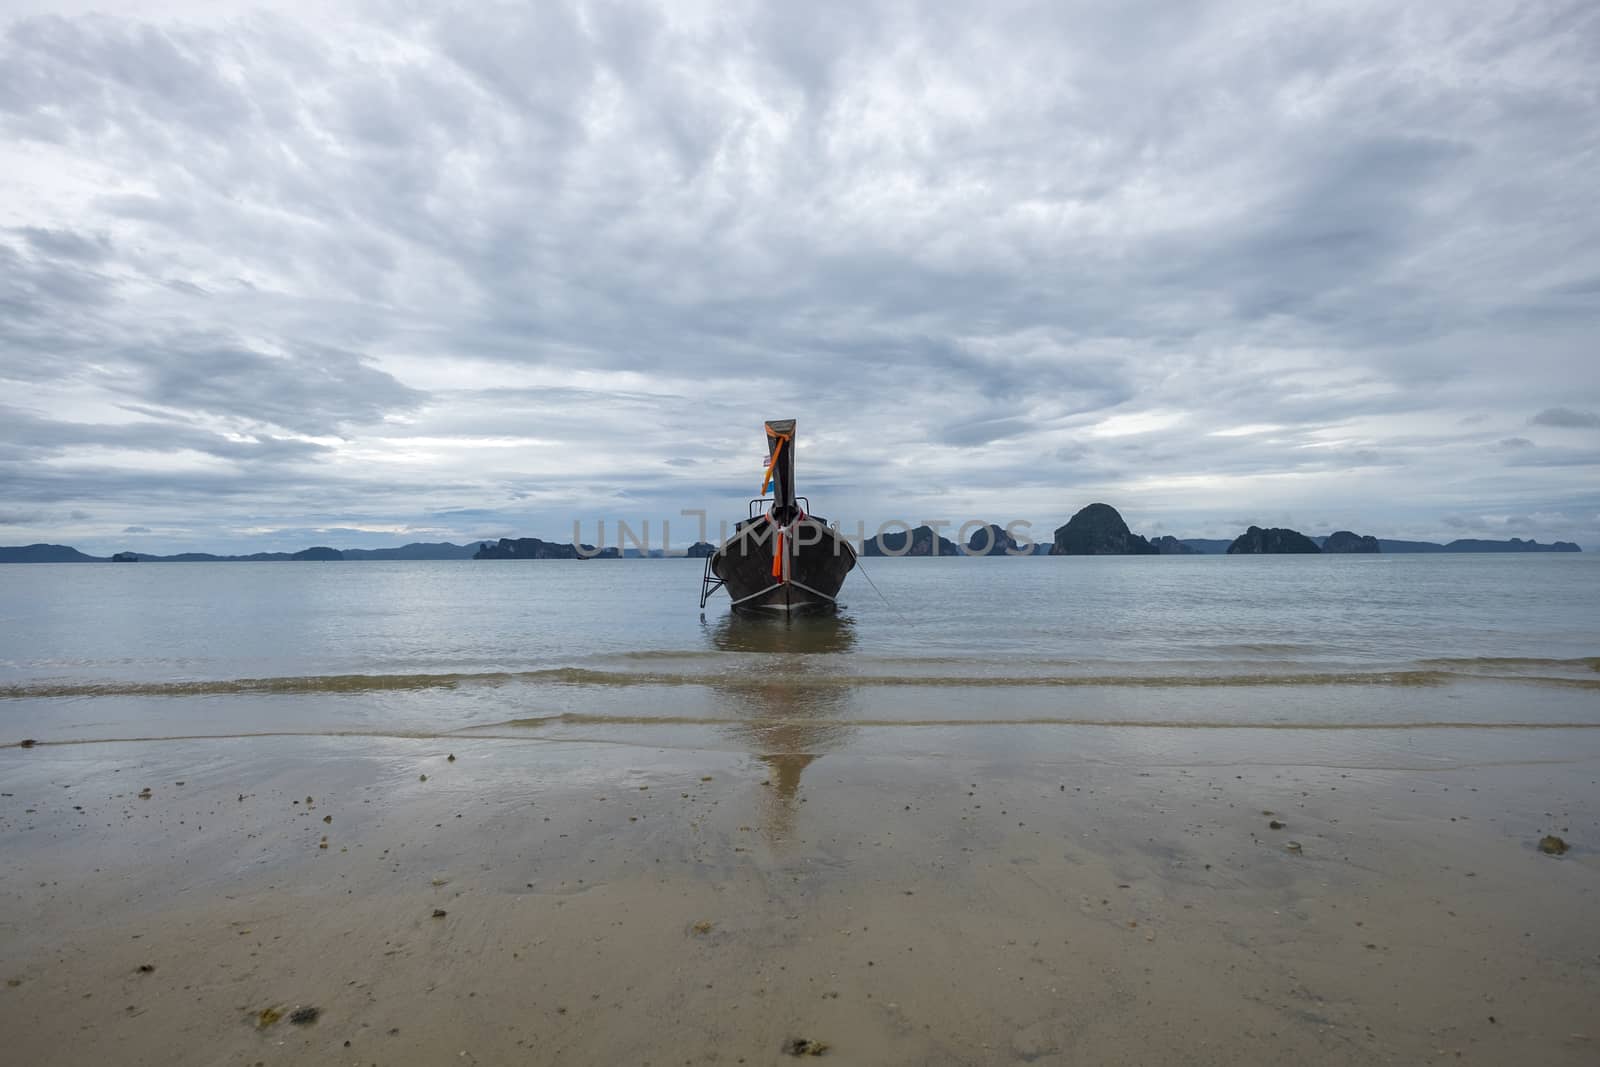 Traditional thai longtail boat near the beach in cloudy weather. Scenery rock islands in the background